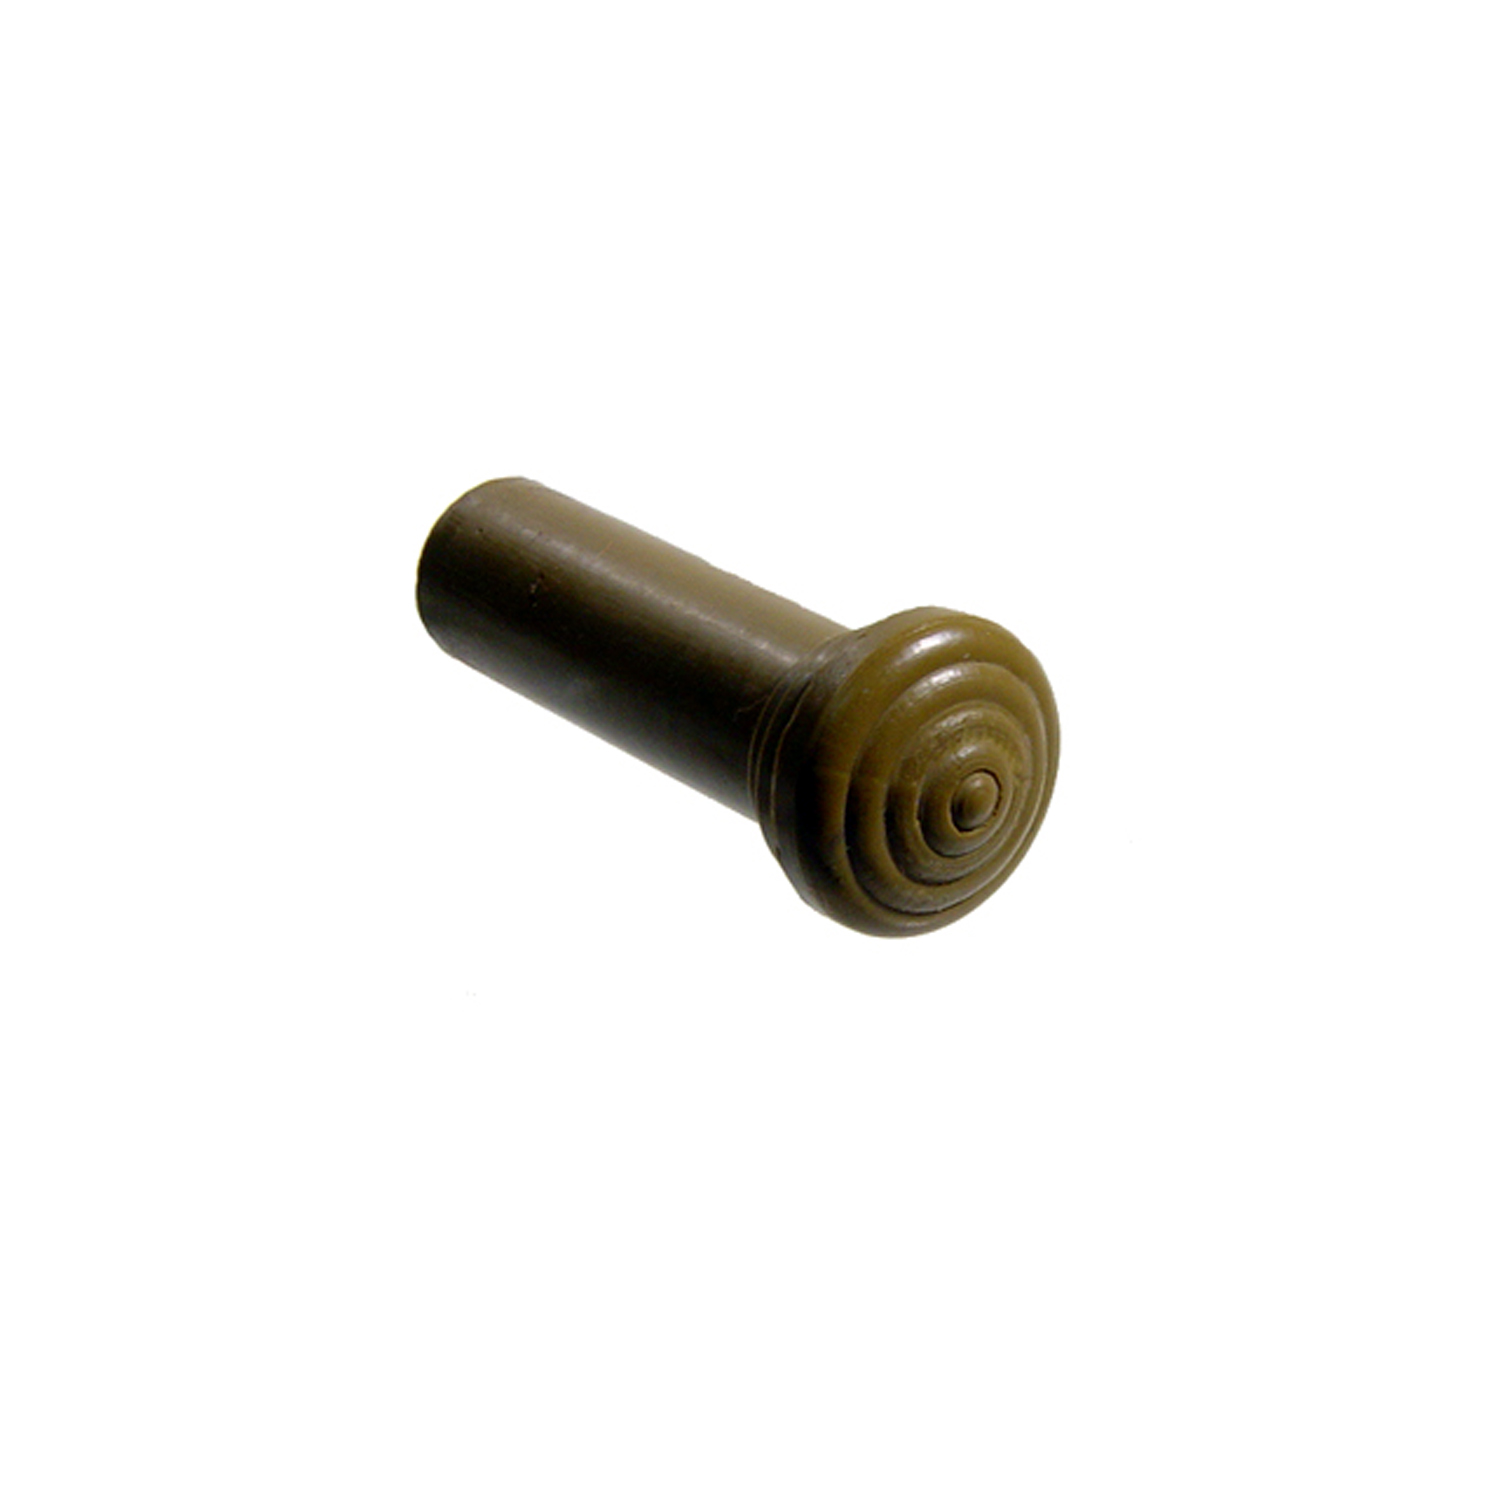 1947 Cadillac Series 62 Door Lock Knob.  Made of Olive Green rubber, self-threading-RP 304-G